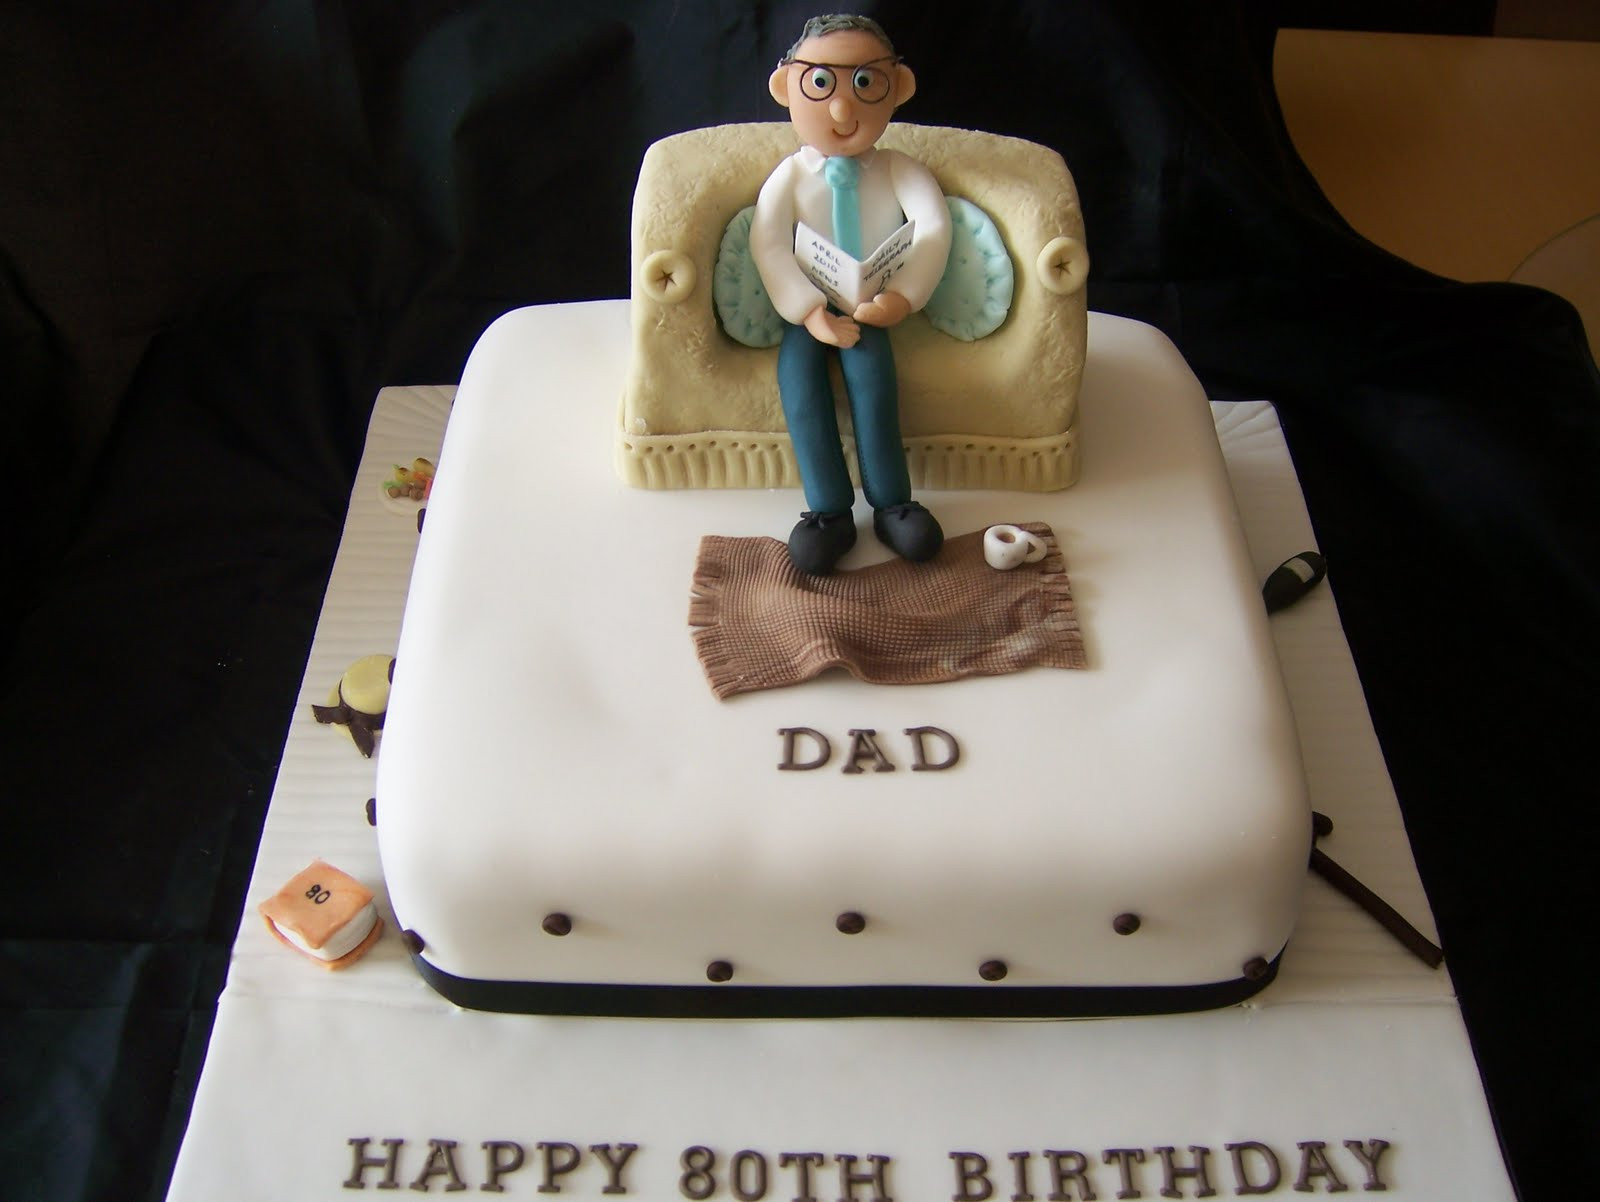 Dad Birthday Cake
 80th Birthday Cake A dad in his armchair and a lovely chat